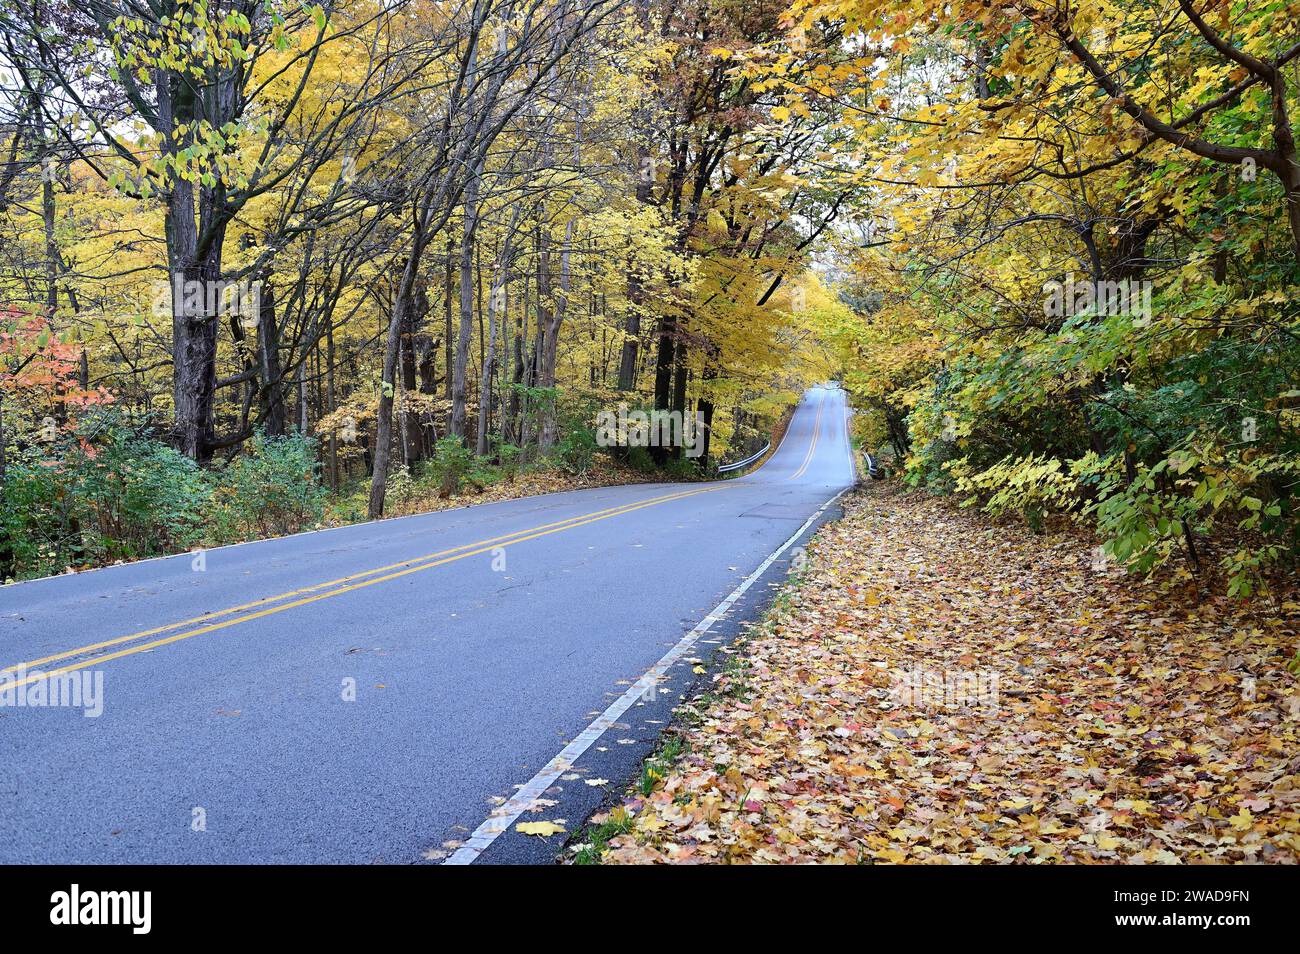 Wayne, Illinois, USA: Country road splicing through a wooded area showing its full colors. Stock Photo